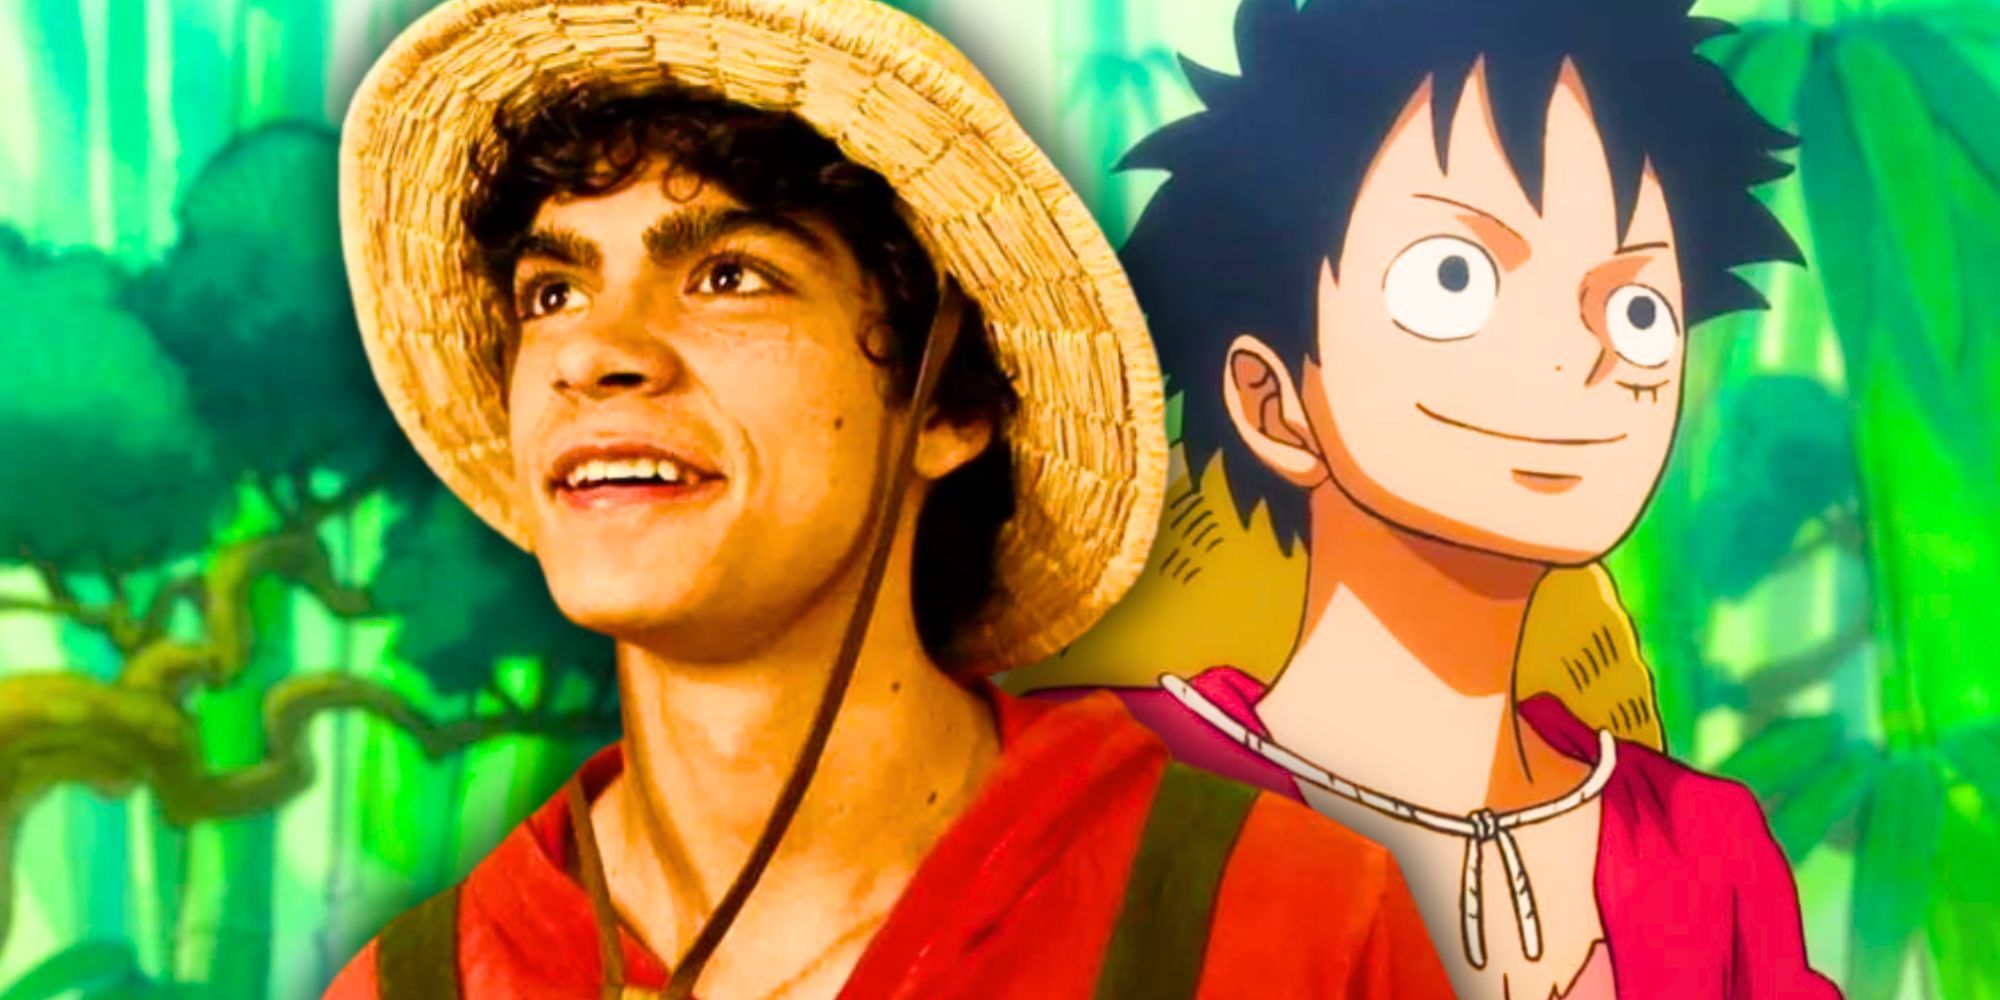 One Piece's Live-Action Series Gets 10-Episode Order from Netflix